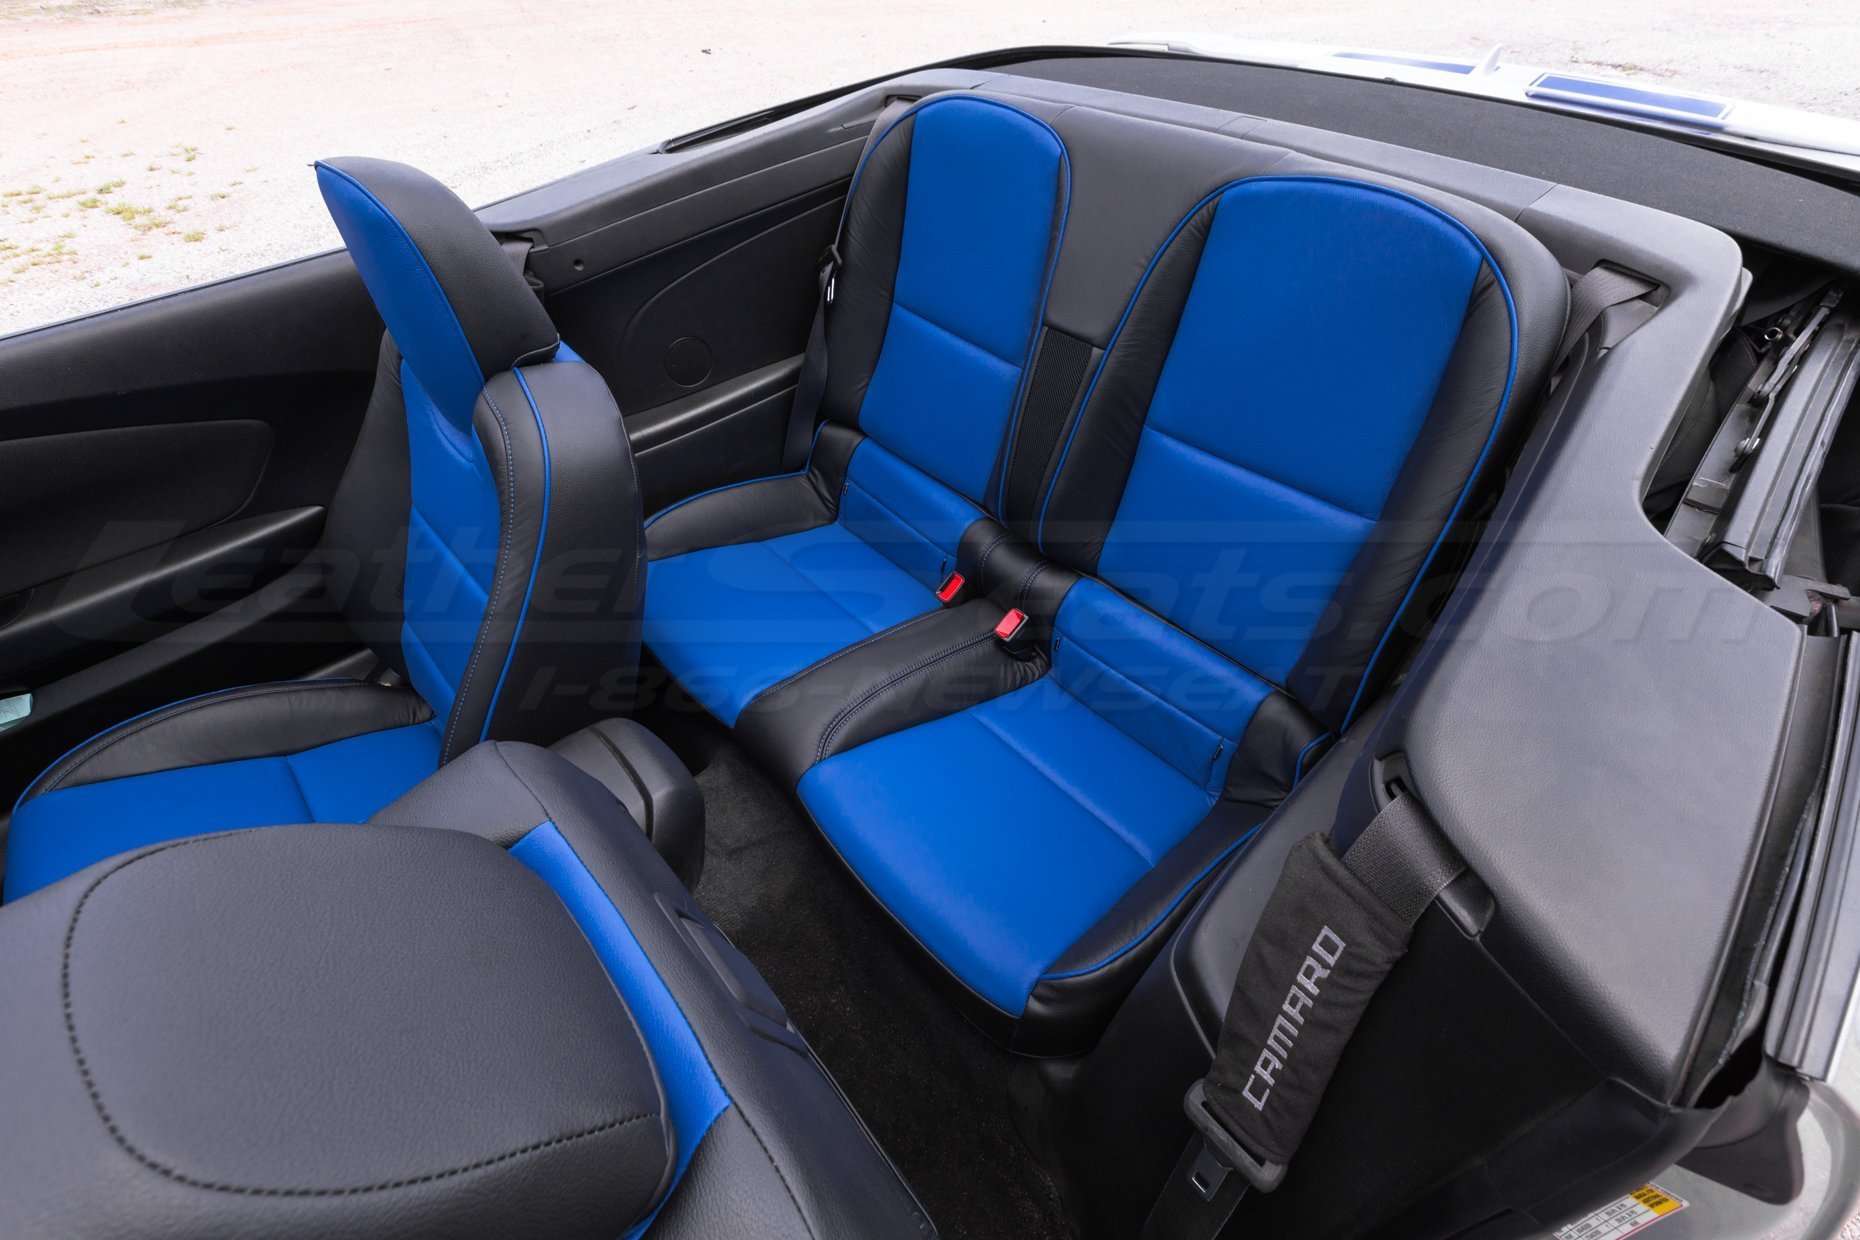 2010-2015 Chevrolet Camaro with installed leather seats - Rear seats from driver's side